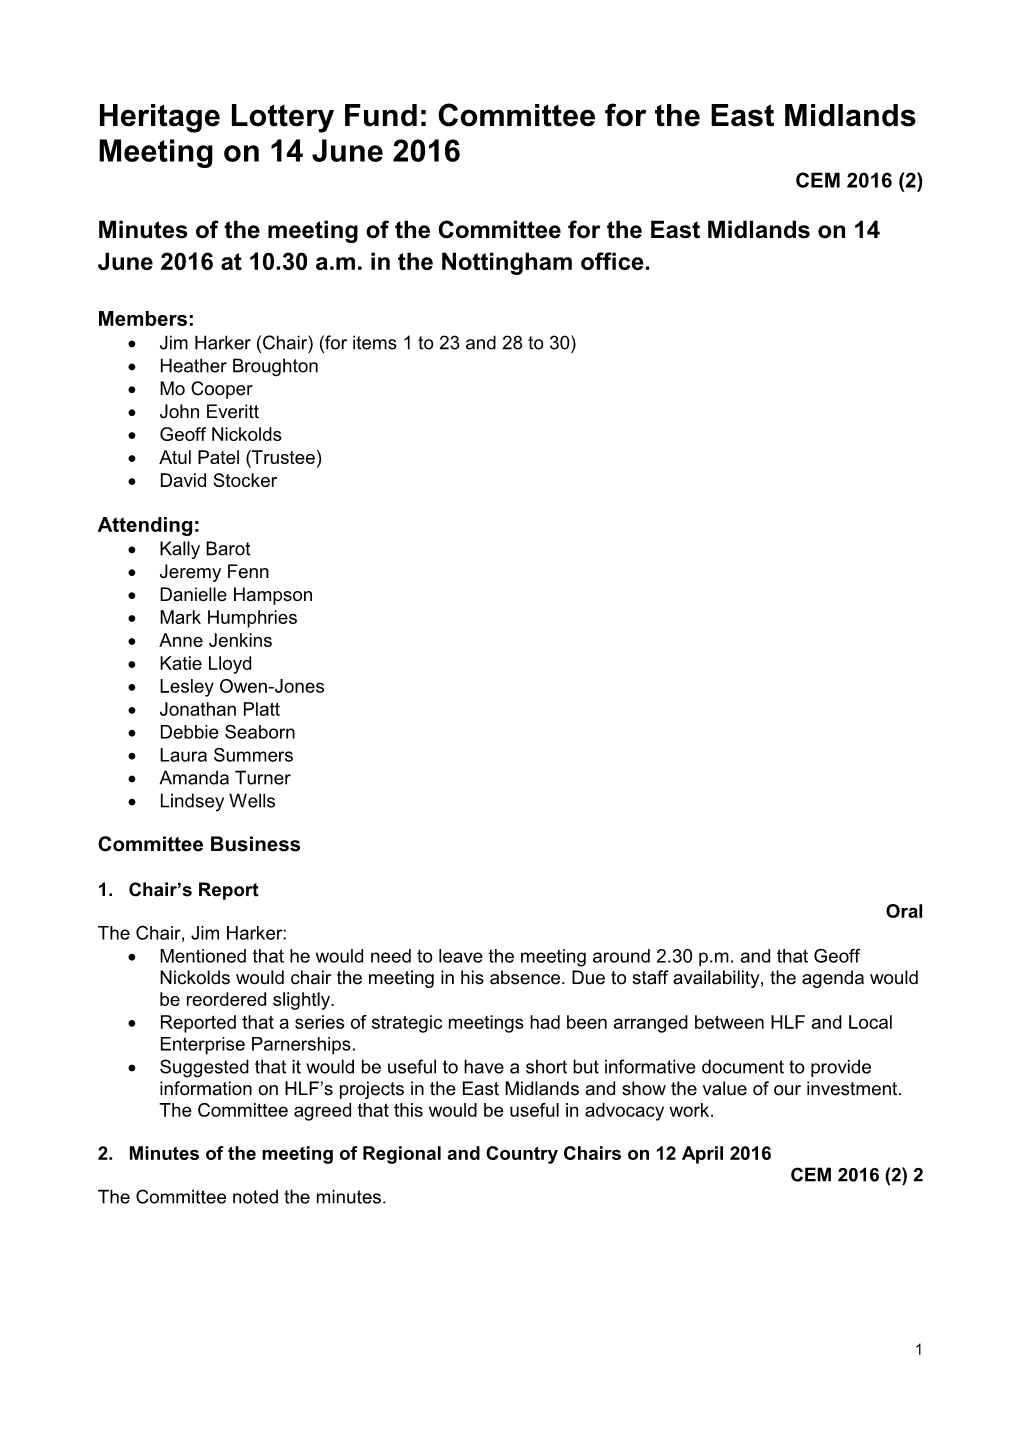 Committee for East Midlands Minutes of the June Meeting